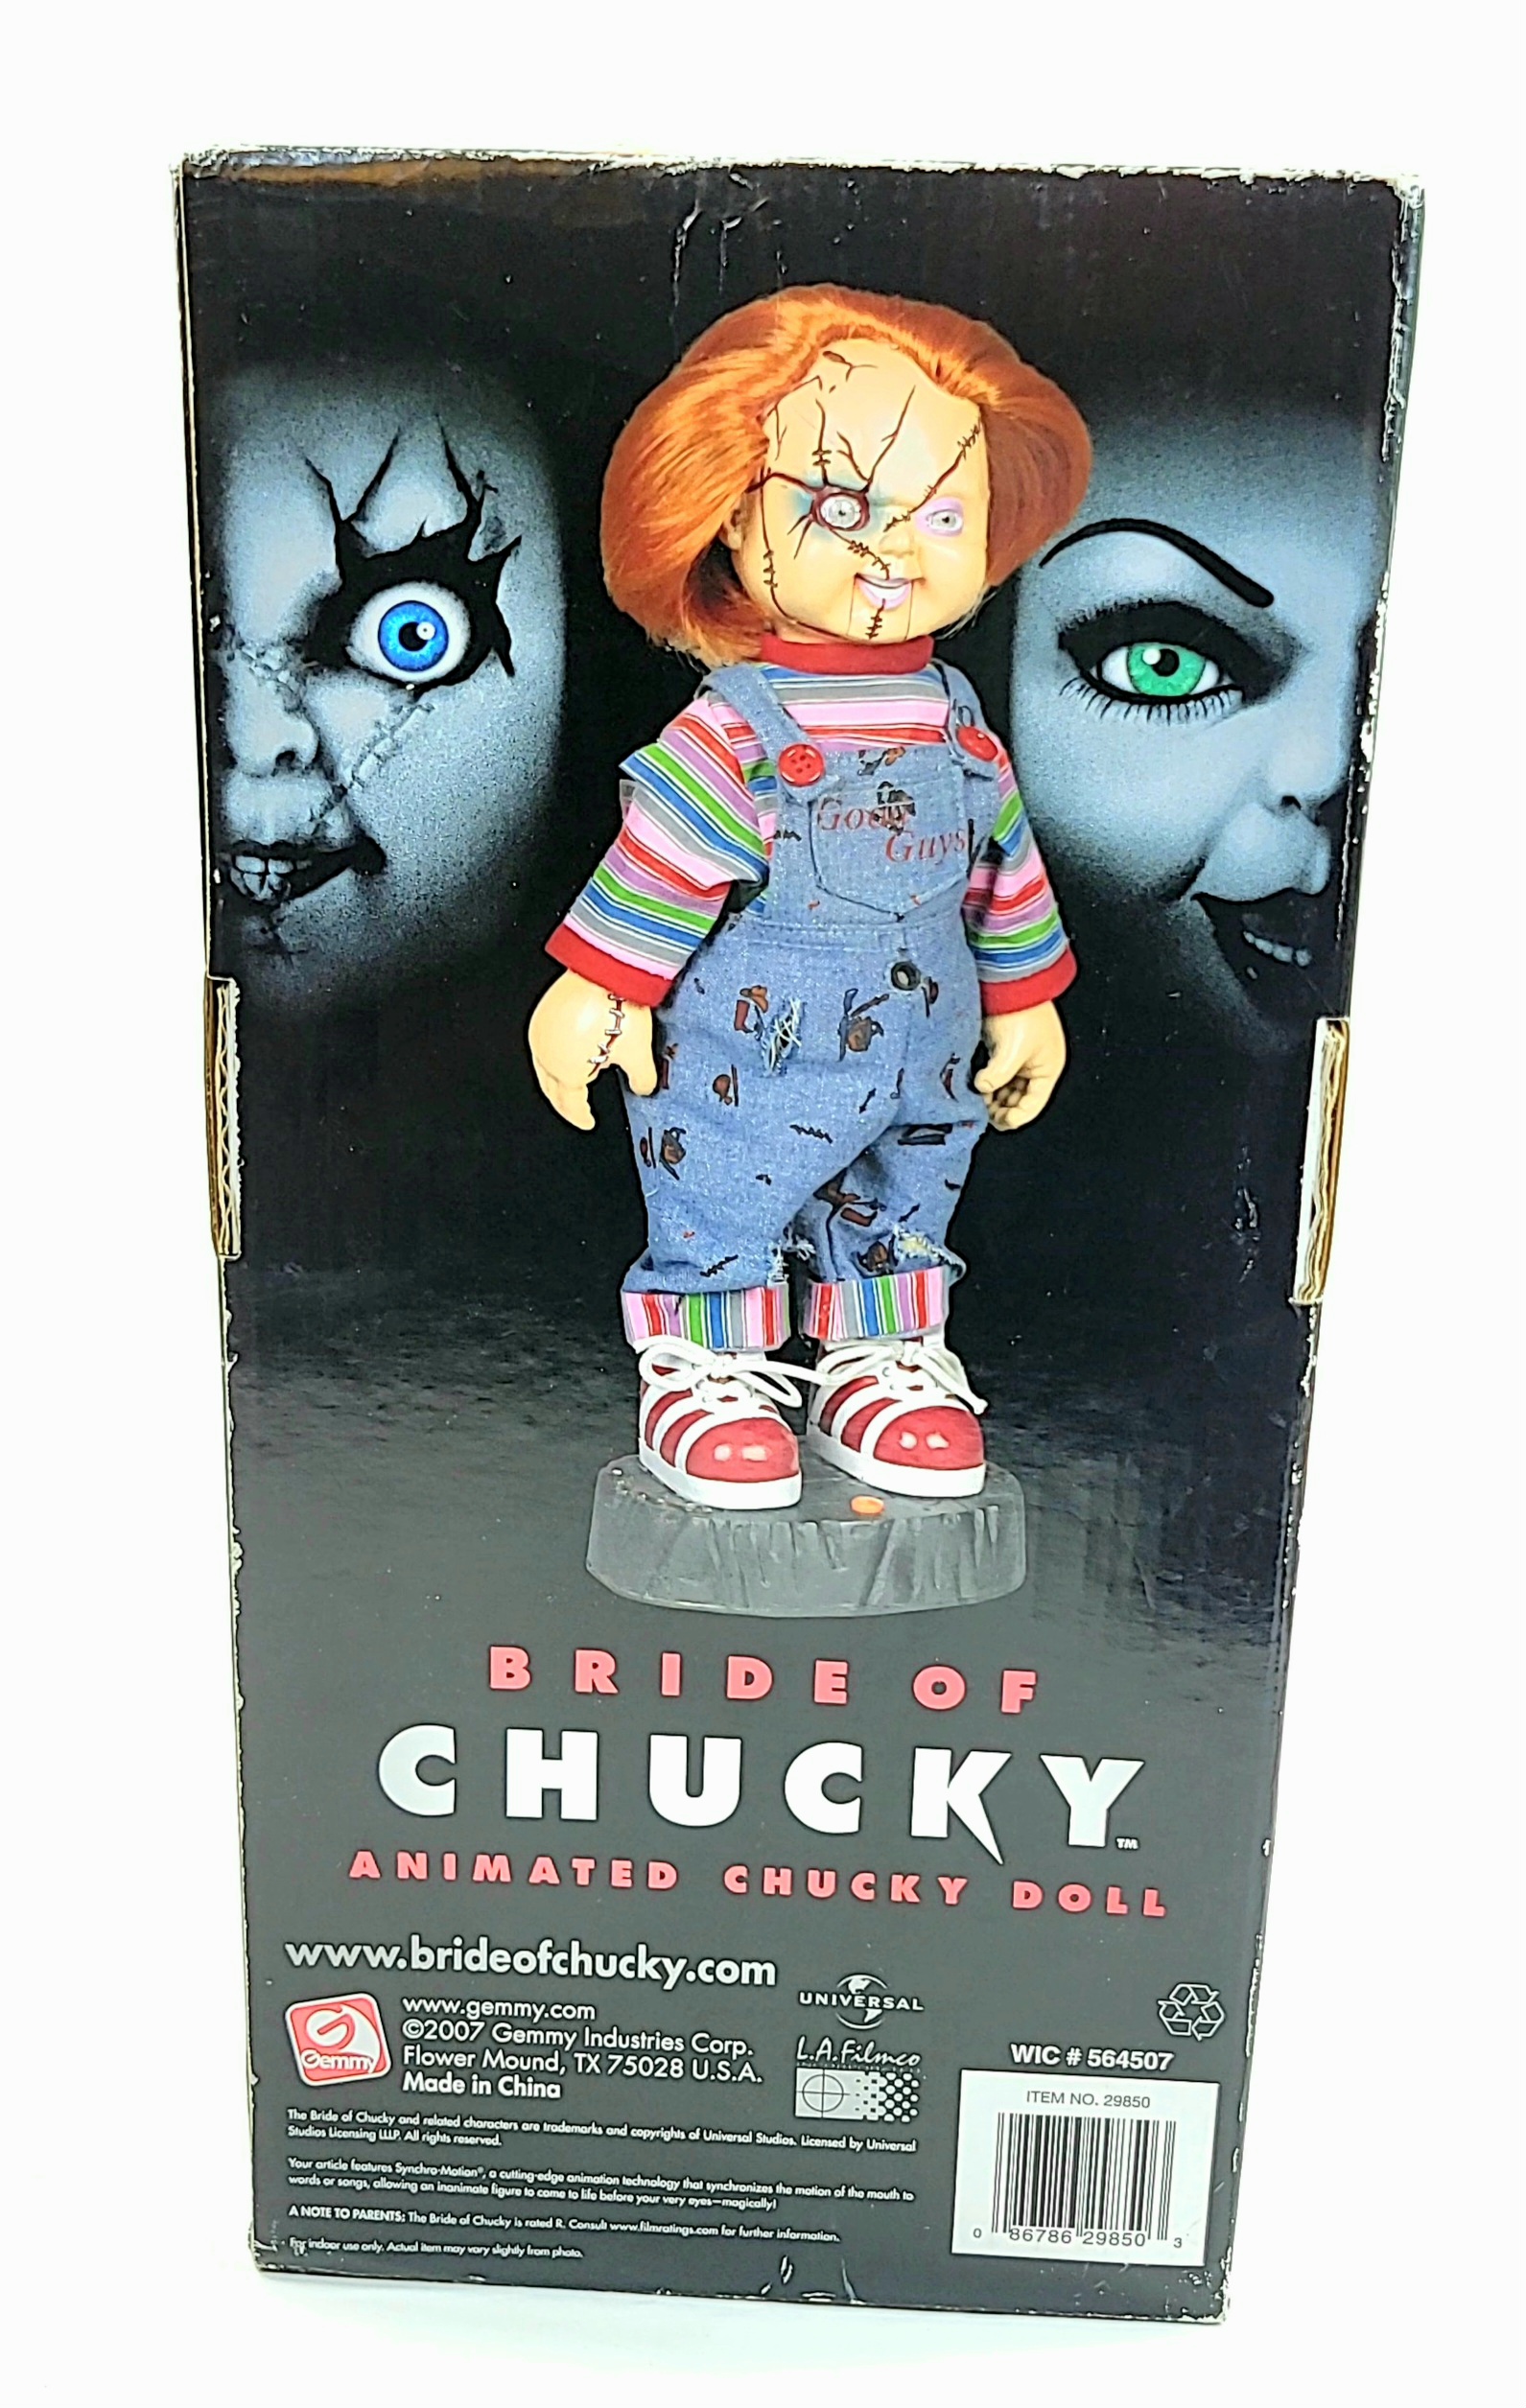 Rare Gemmy "Bride of Chucky" Animated 14" Talking Action Figure Doll